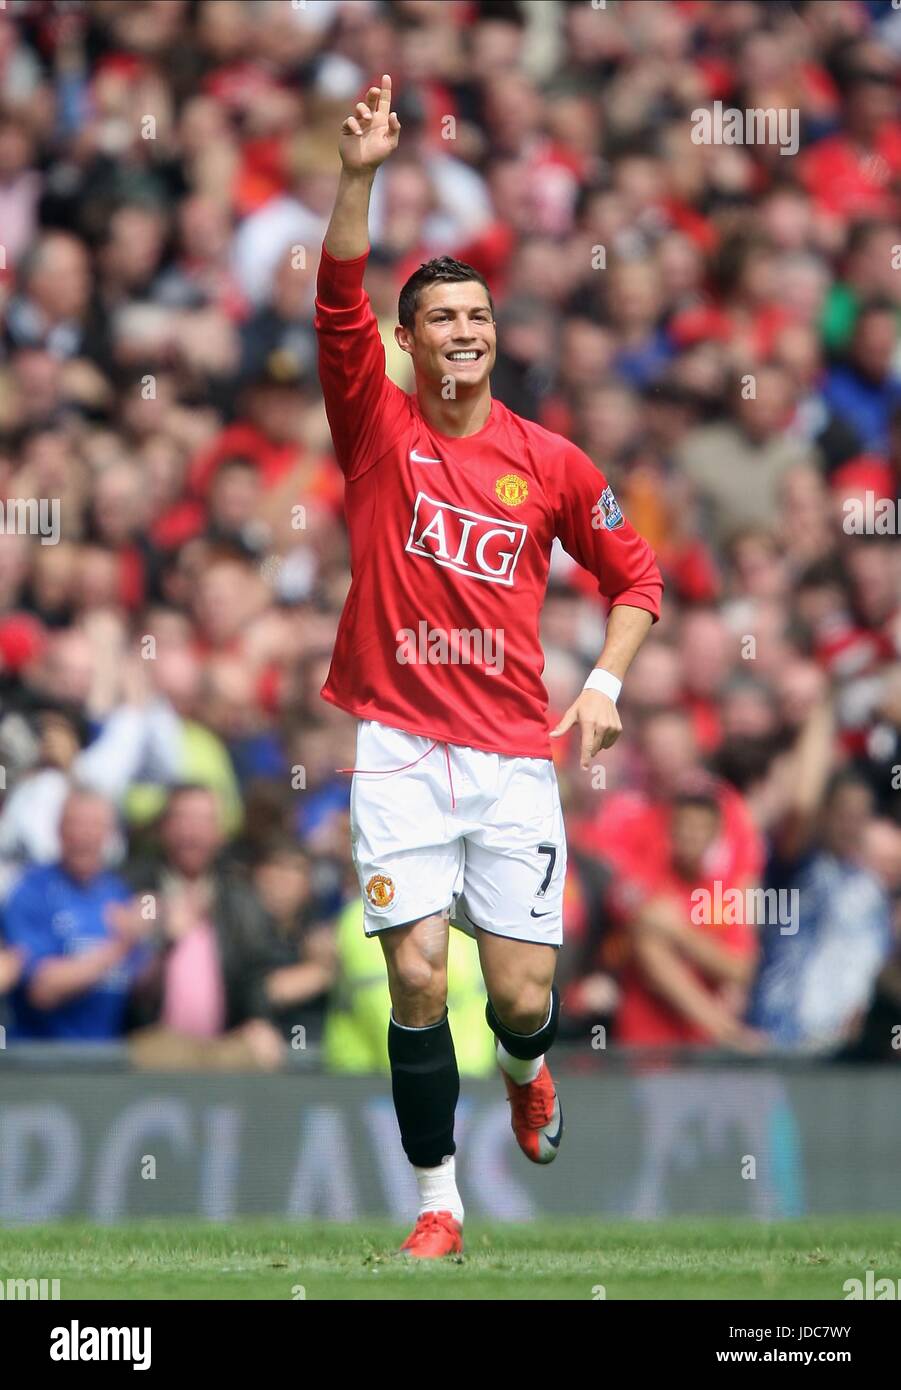 CRISTIANO RONALDO MANCHESTER UNITED FC OLD TRAFFORD MANCHESTER EN ANGLETERRE 10 Mai 2009 Banque D'Images